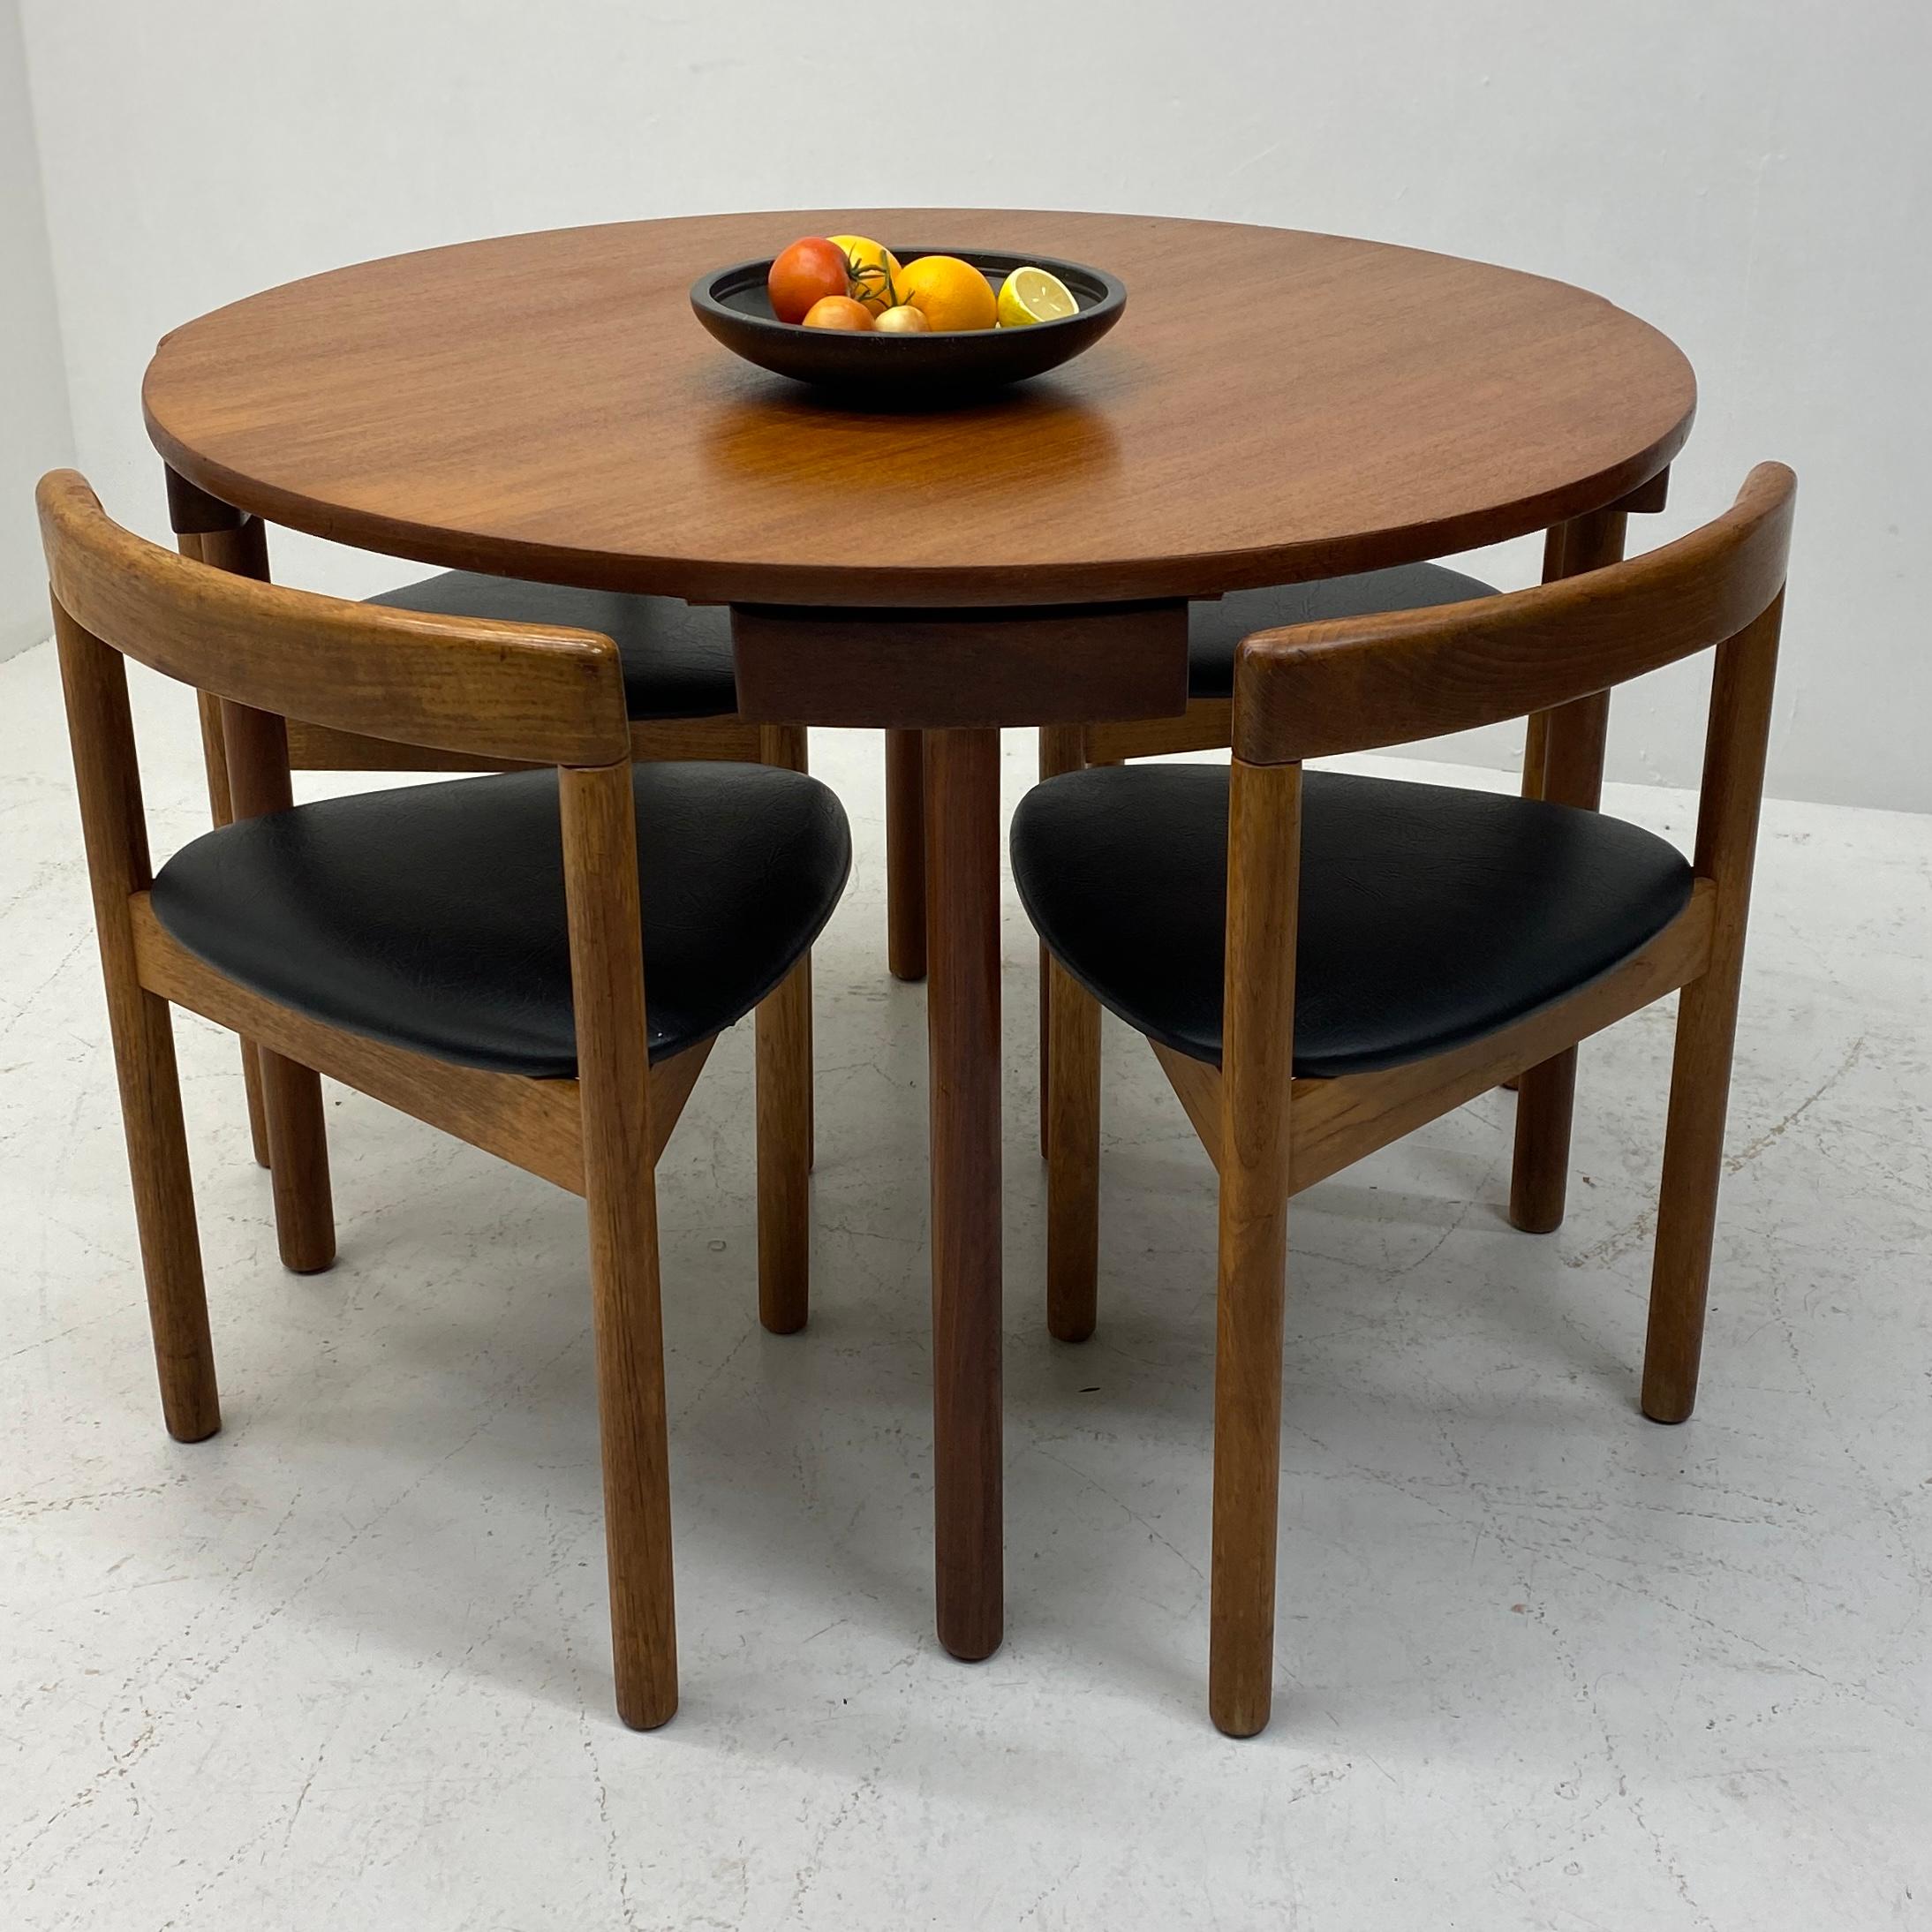 A mid century classic, this Danish dining set is manufactured by A.B.J Denmark, for Hans Olsen. The clever & stylish design makes the chairs disappear in the table with its ingenious design. The chair frames & legs are in solid teak with black vinyl